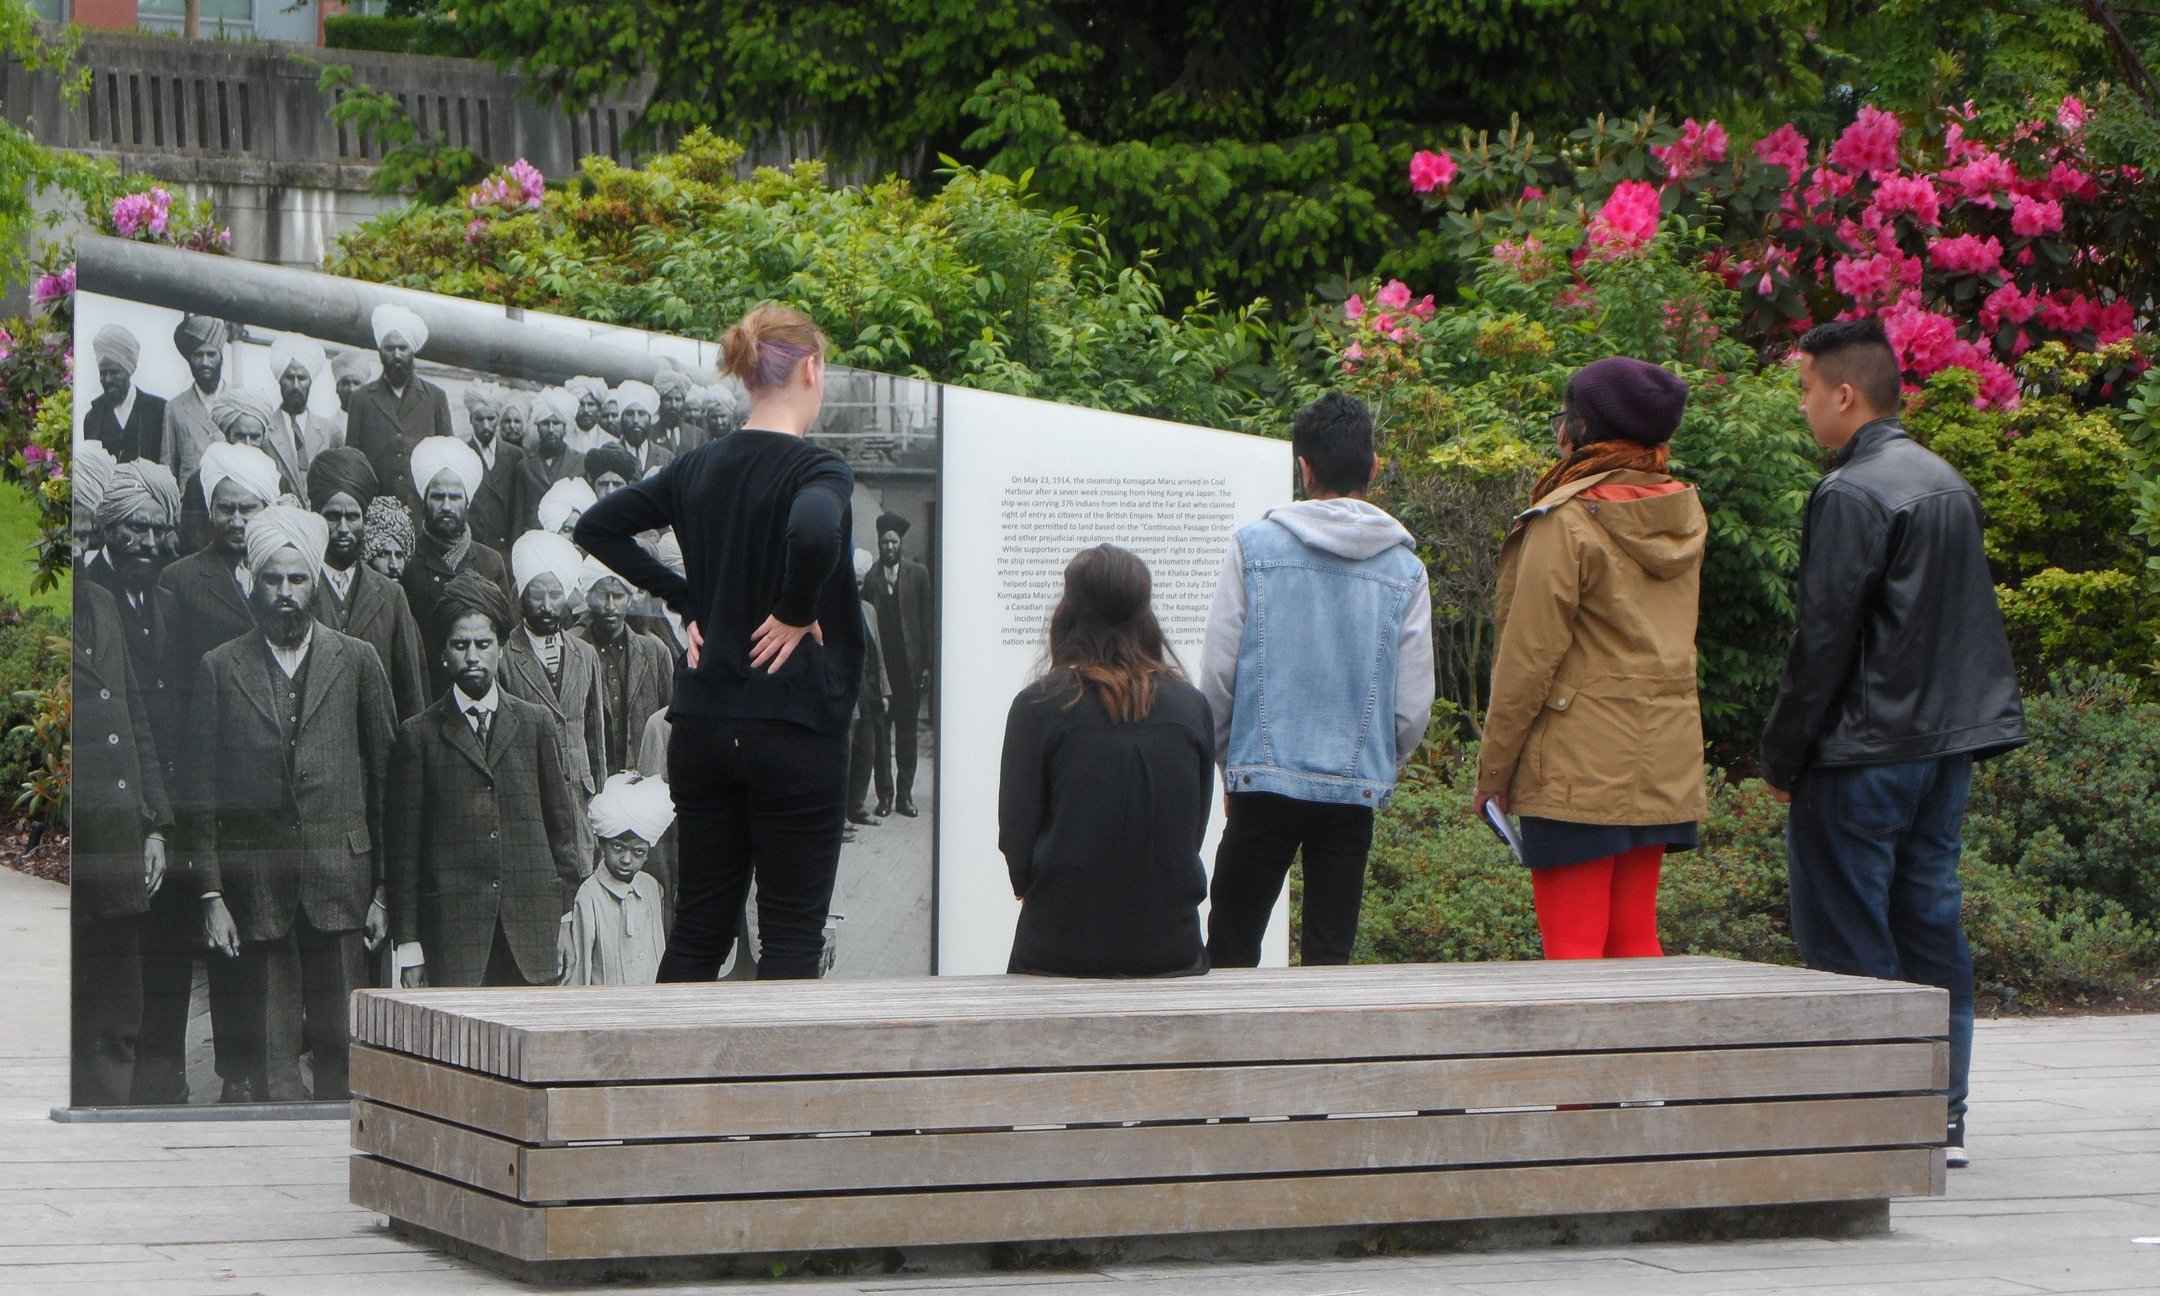 Memory Walk participants studying the monument for their film in Vancouver (May 2015)